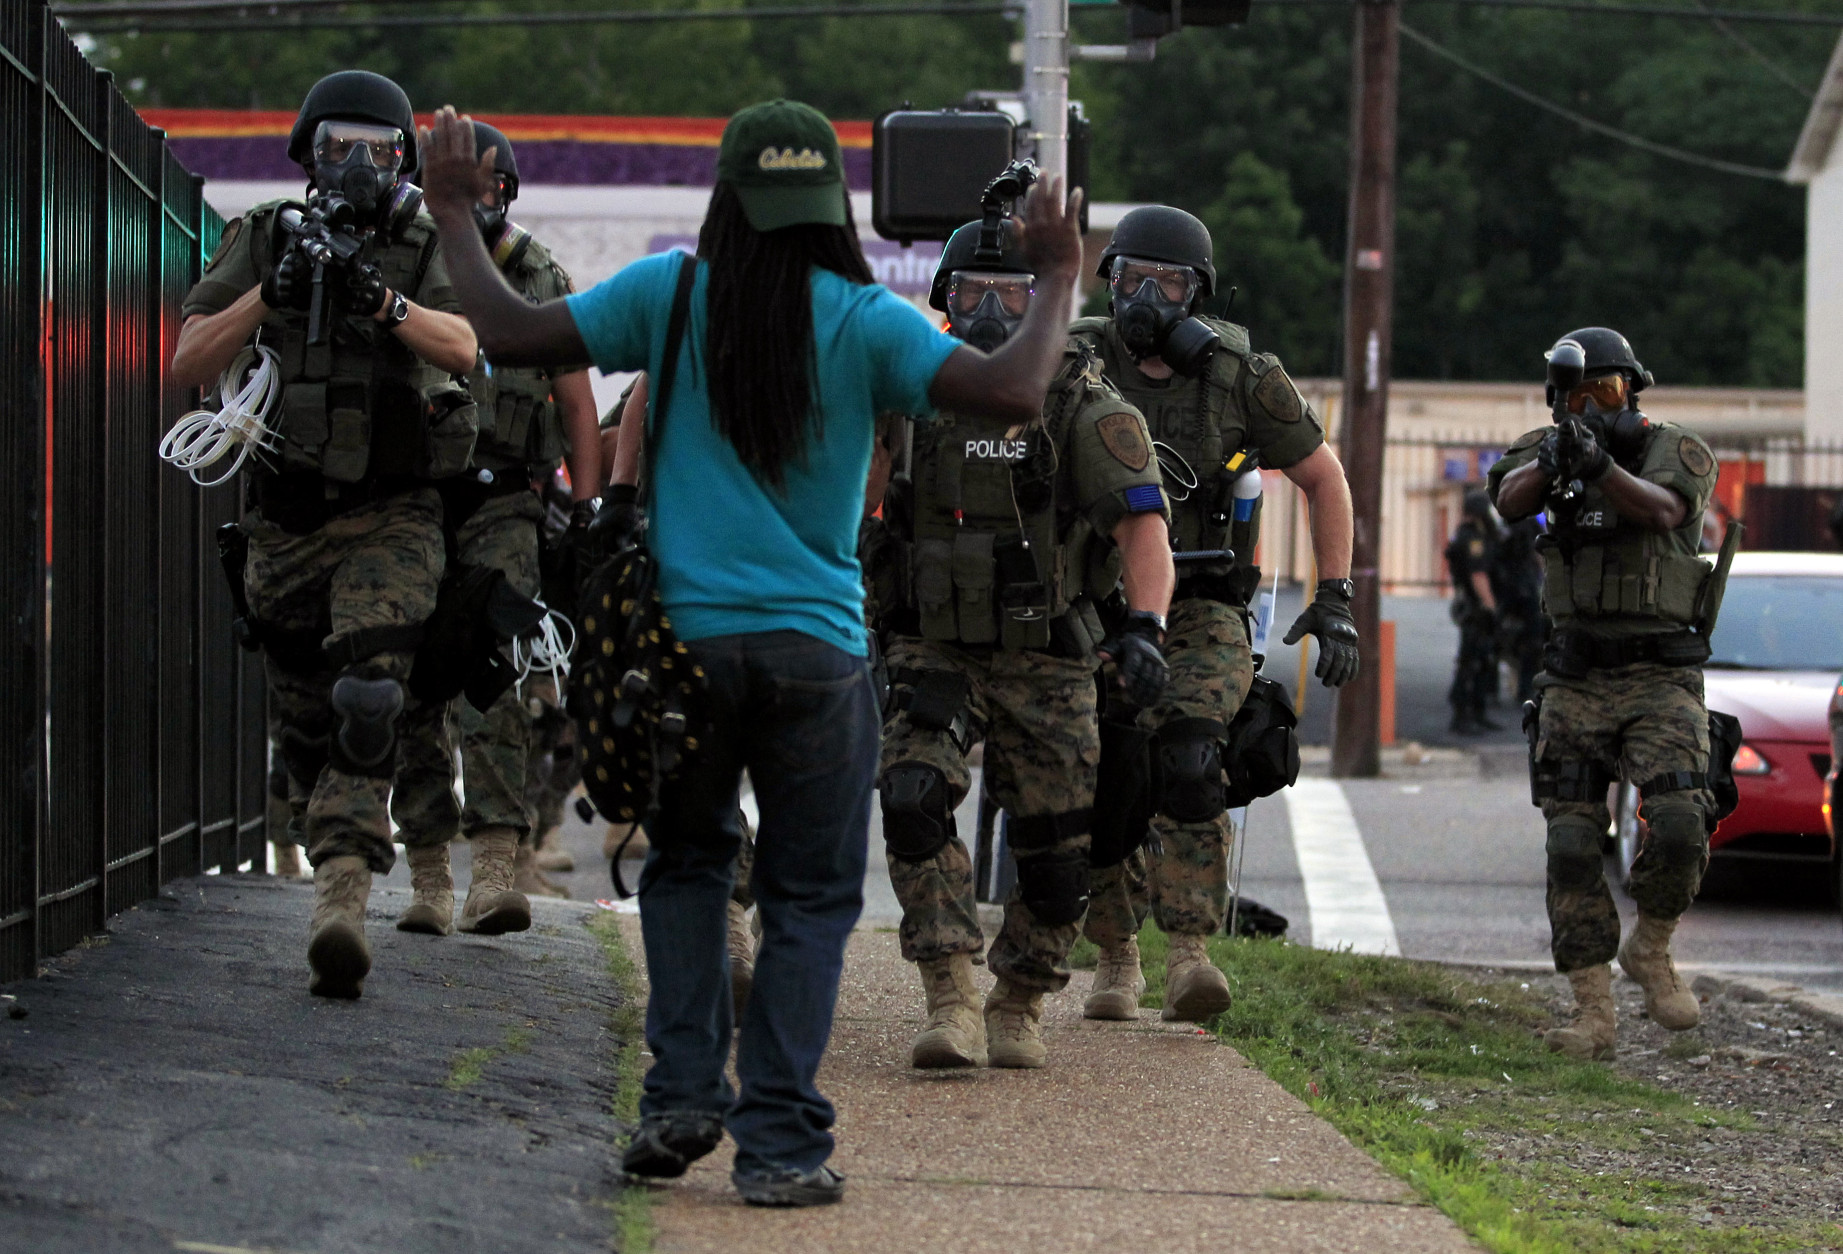 FOR USE AS DESIRED, YEAR END PHOTOS - FILE - Police wearing riot gear walk toward a man with his hands raised Monday, Aug. 11, 2014, in Ferguson, Mo. (AP Photo/Jeff Roberson, File)